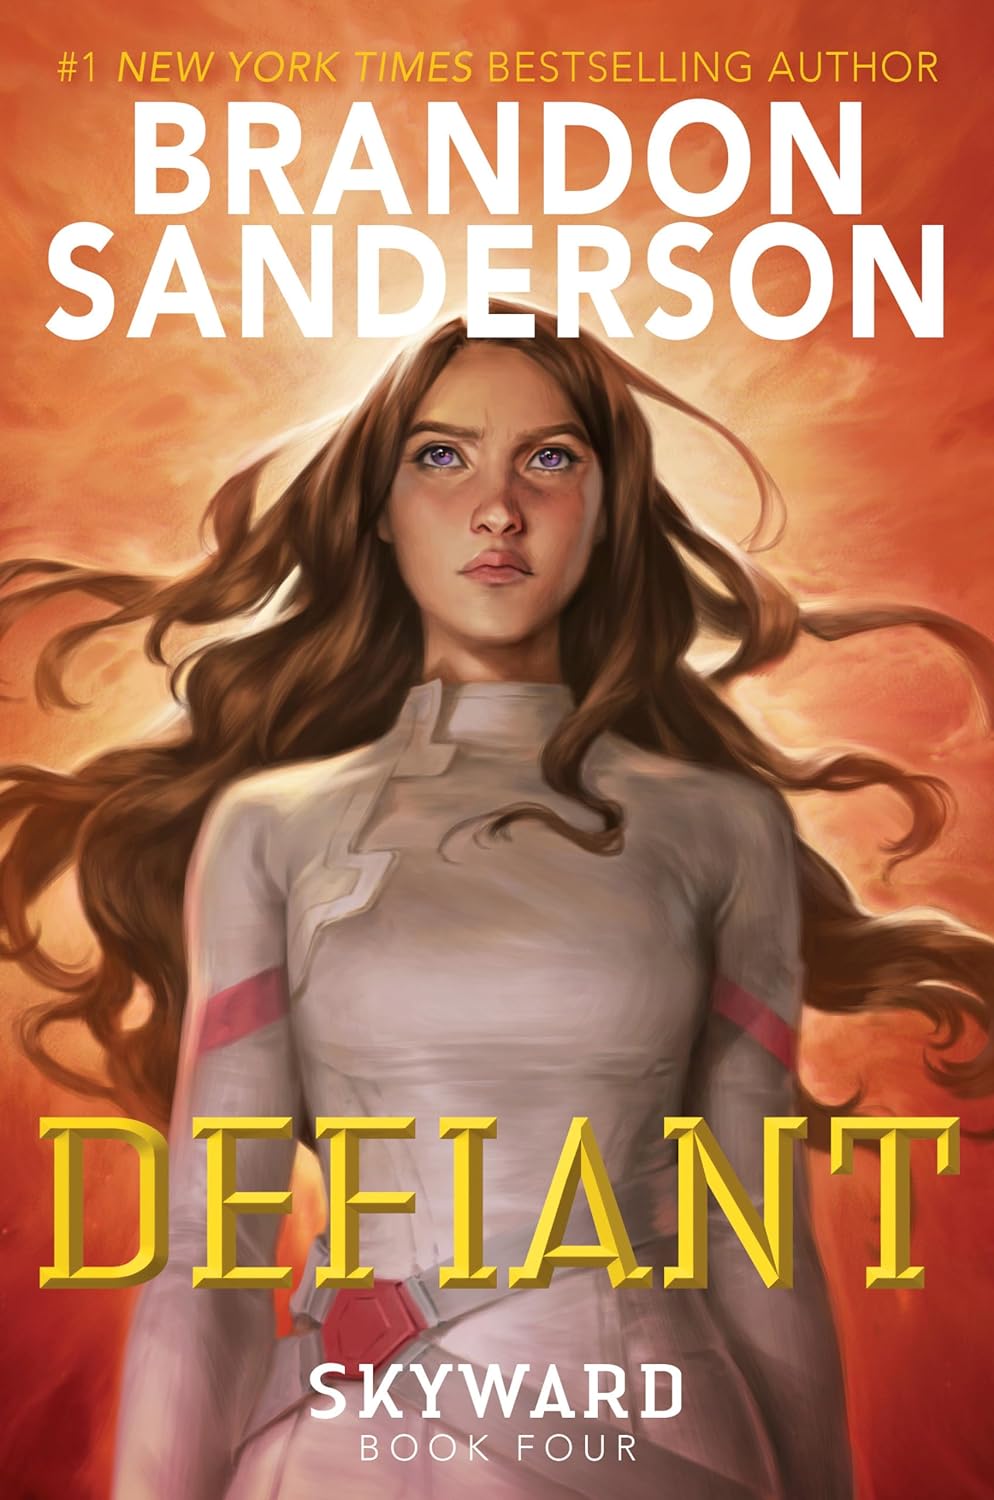 Book cover with girl standing in a halo of white and orange